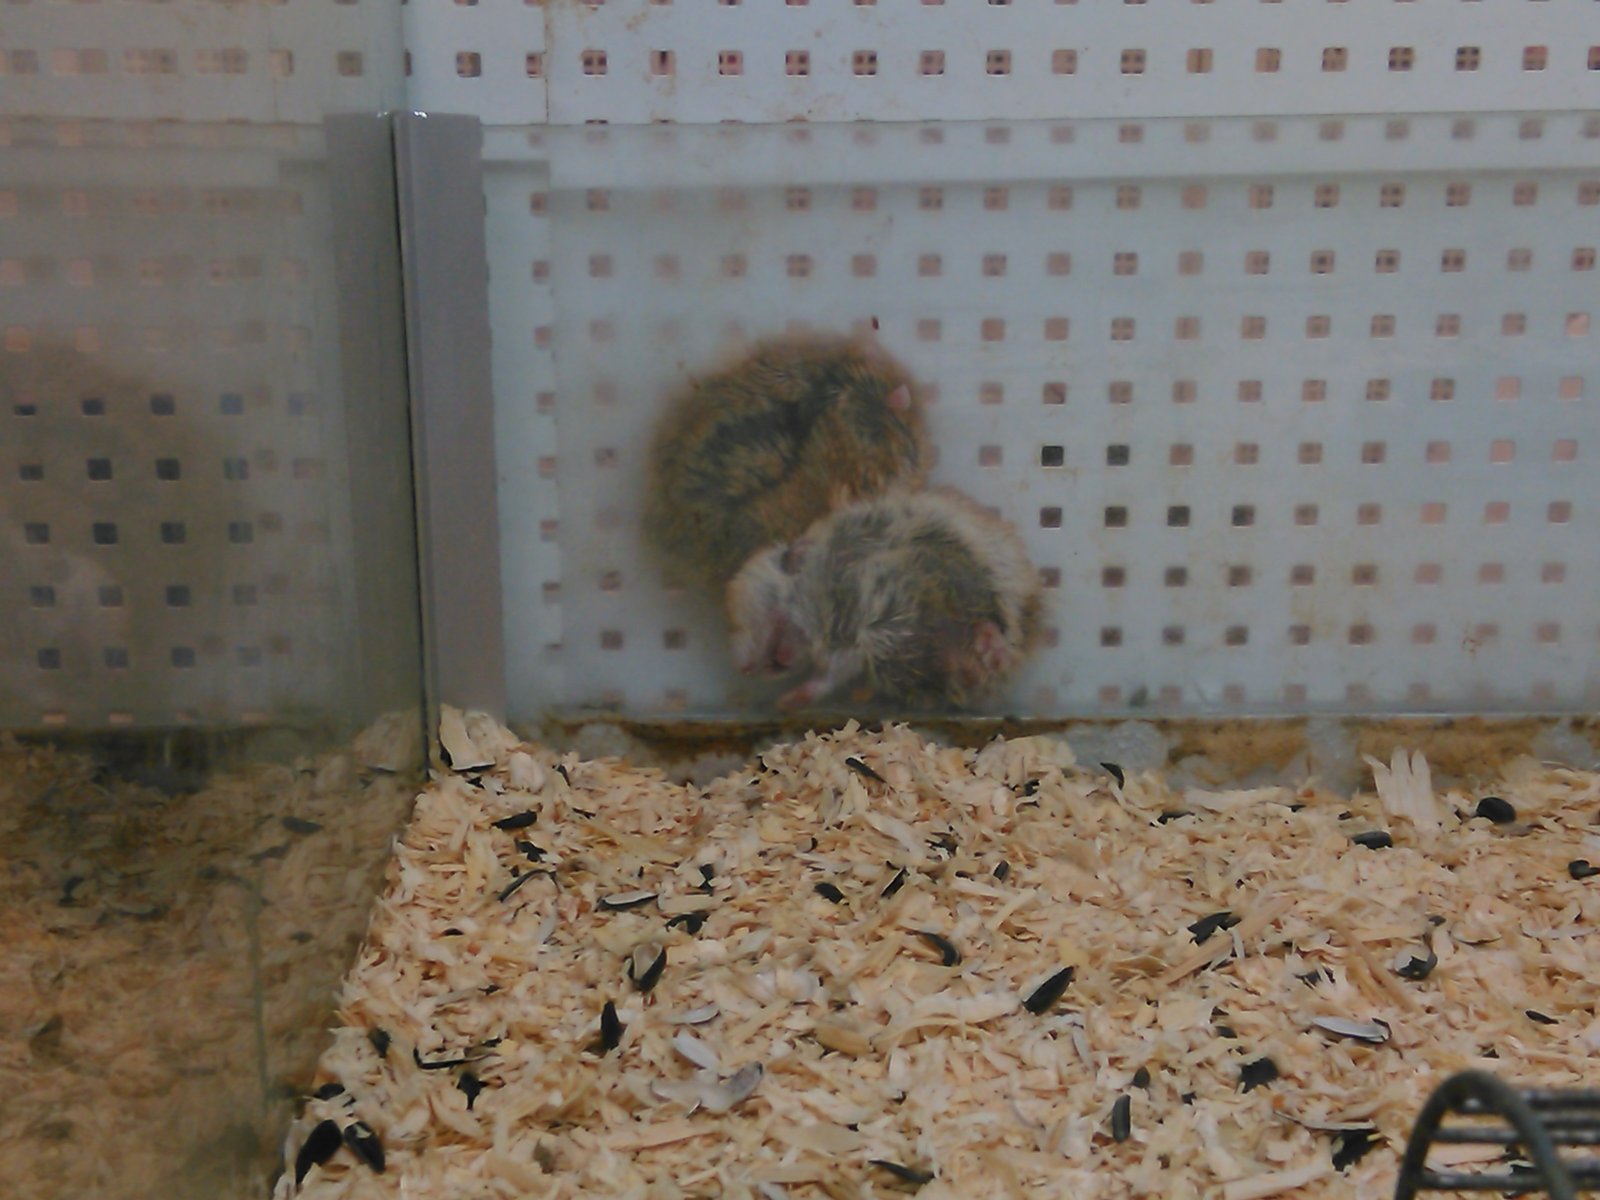 When there are very compassionate customers in the pet store) - My, Animals, Kindness, Yekaterinburg, Hamster